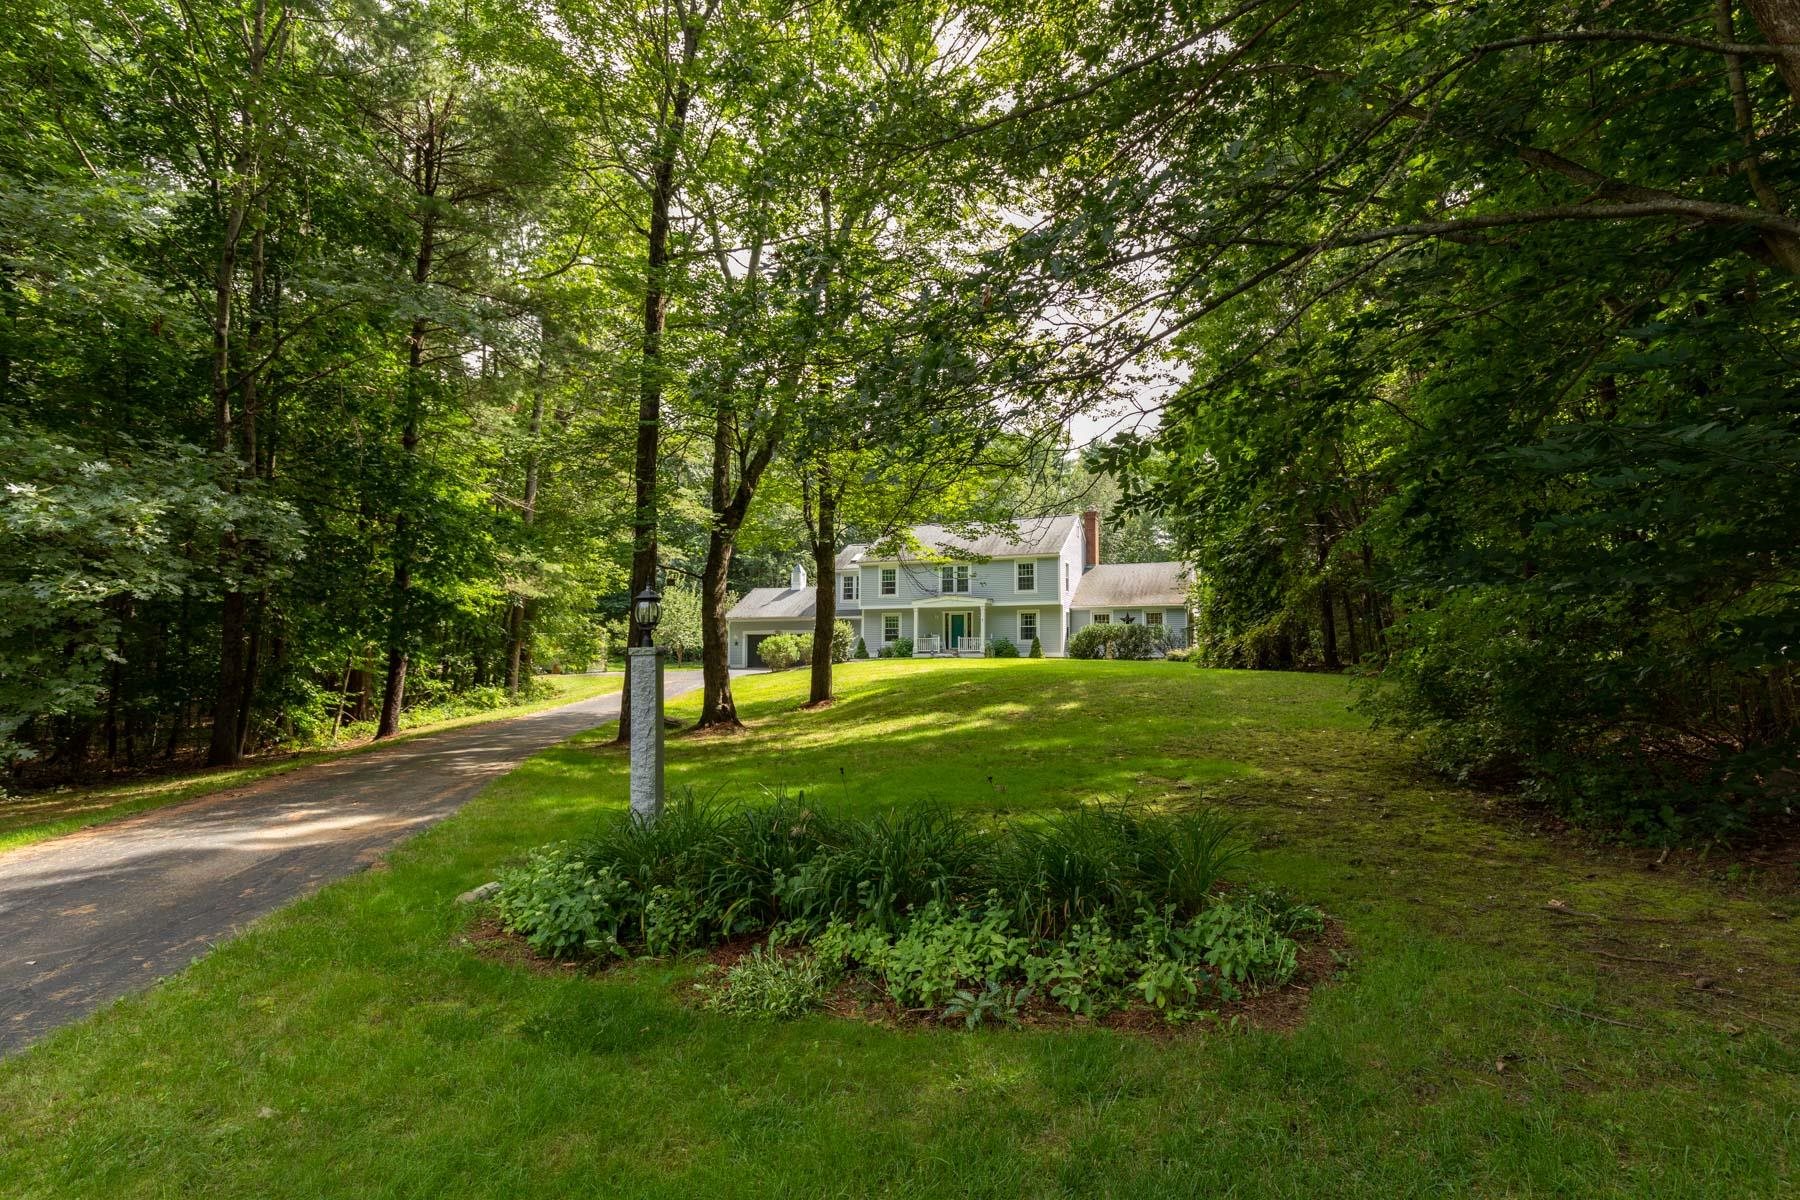 7 Humes Court, Stratham, NH 